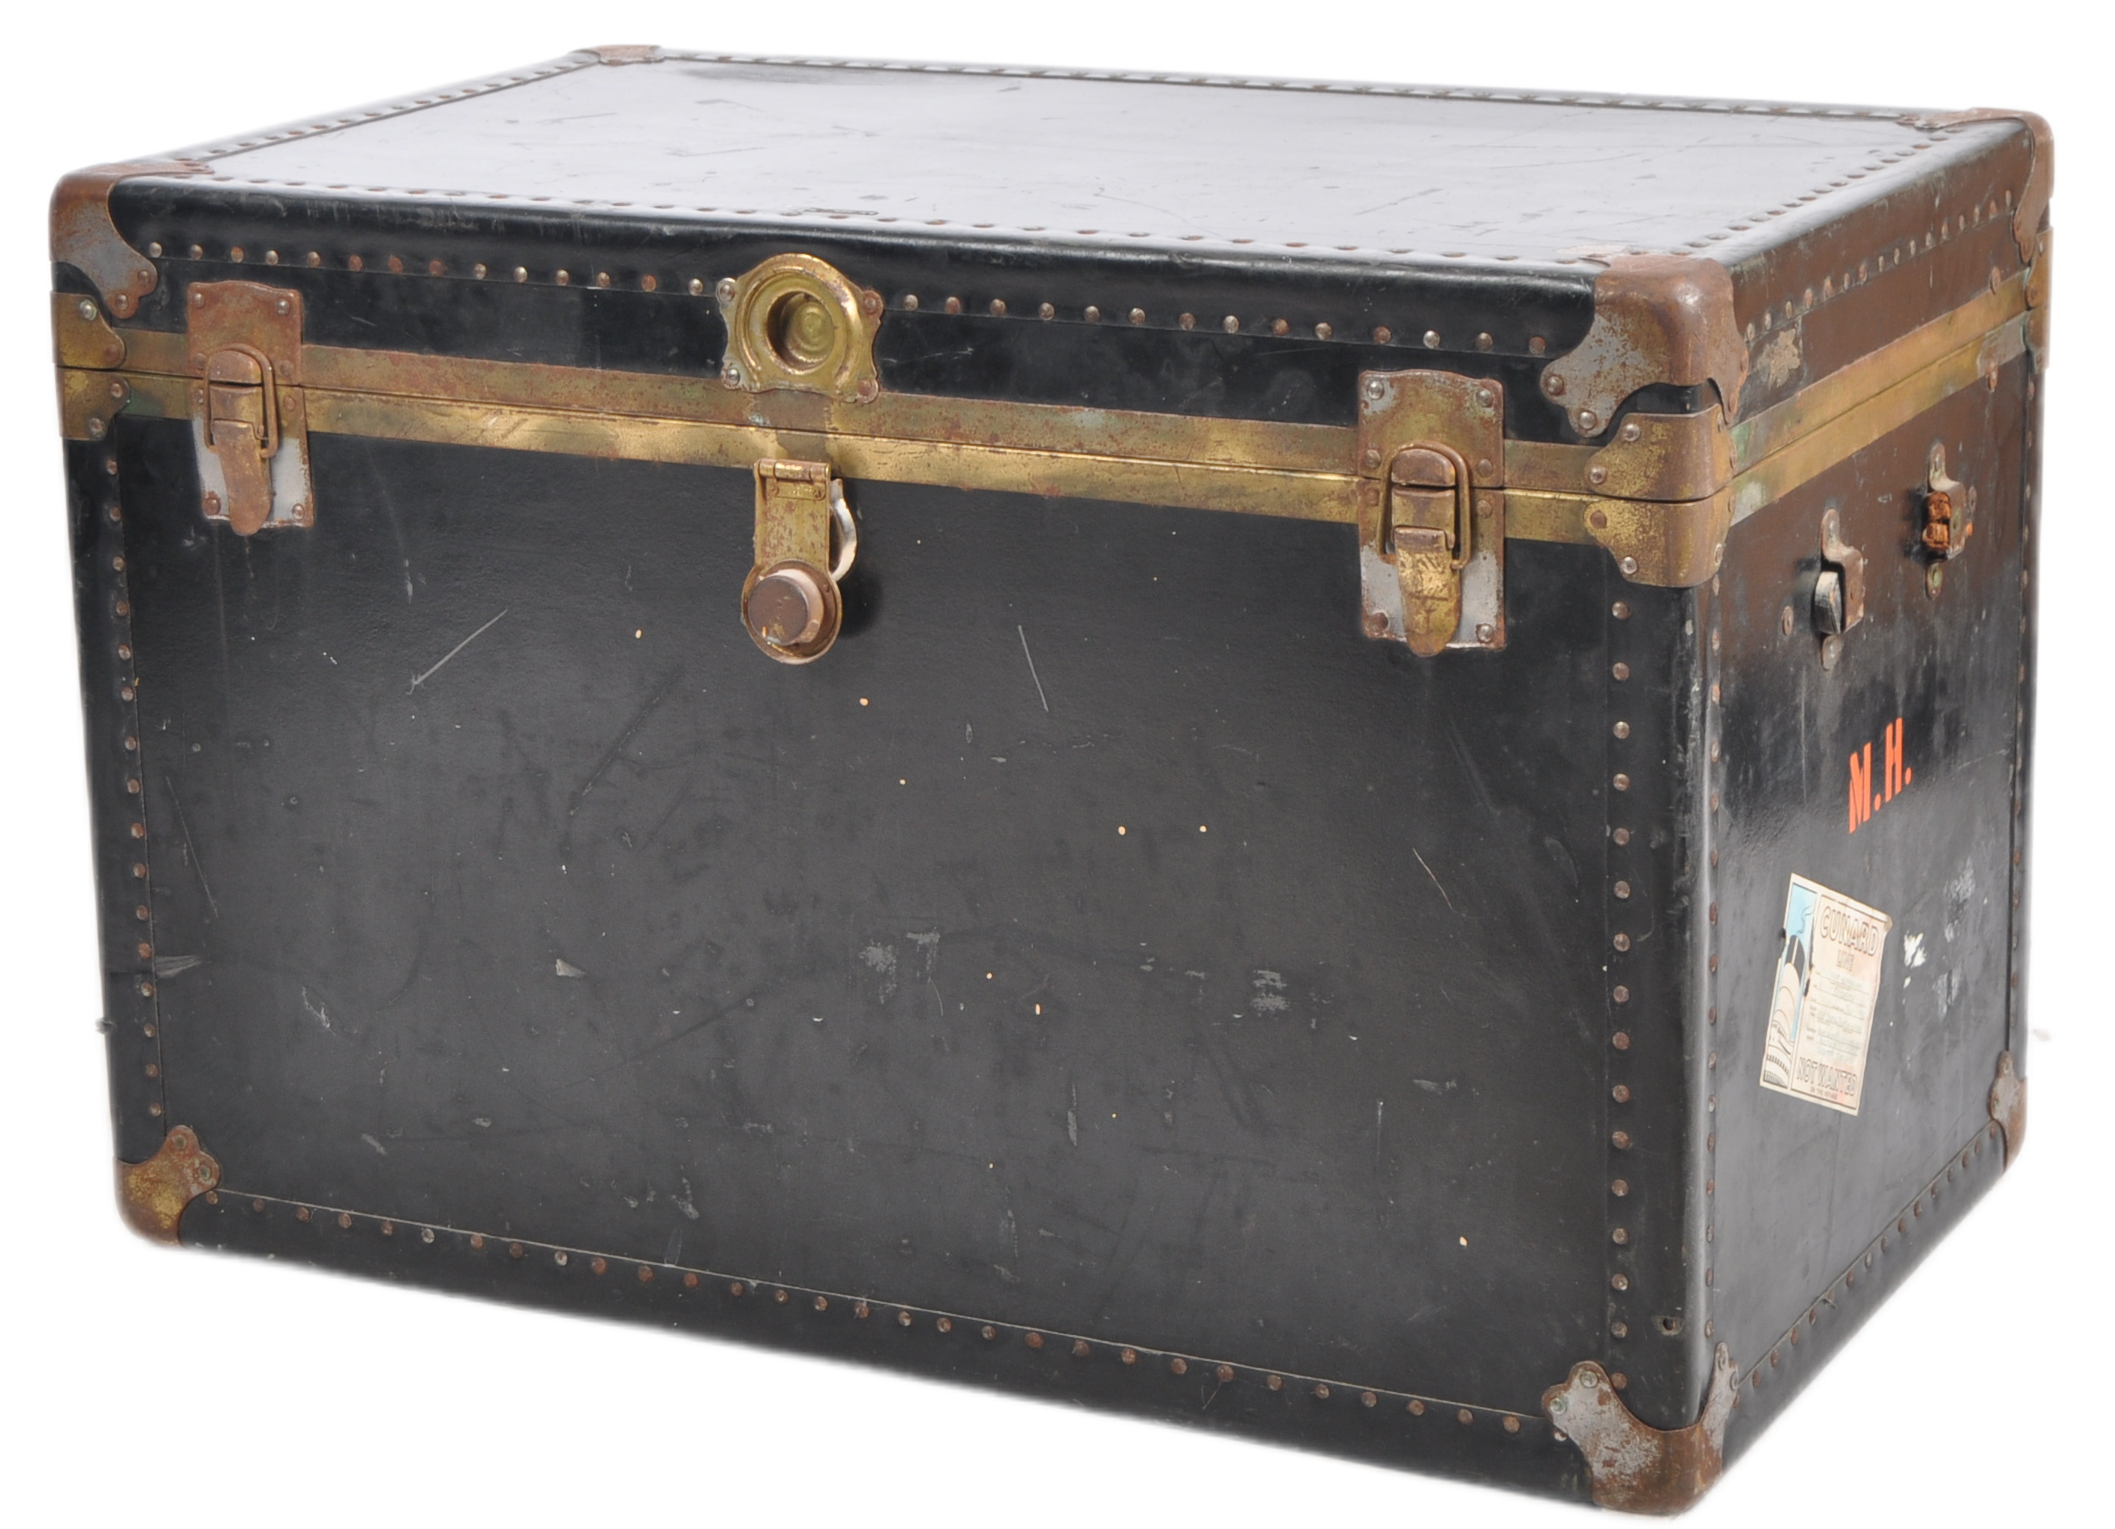 PAIR OF 1920s METAL BOUND STEAMER TRUNK CHEST SIDE TABLES - Image 7 of 12